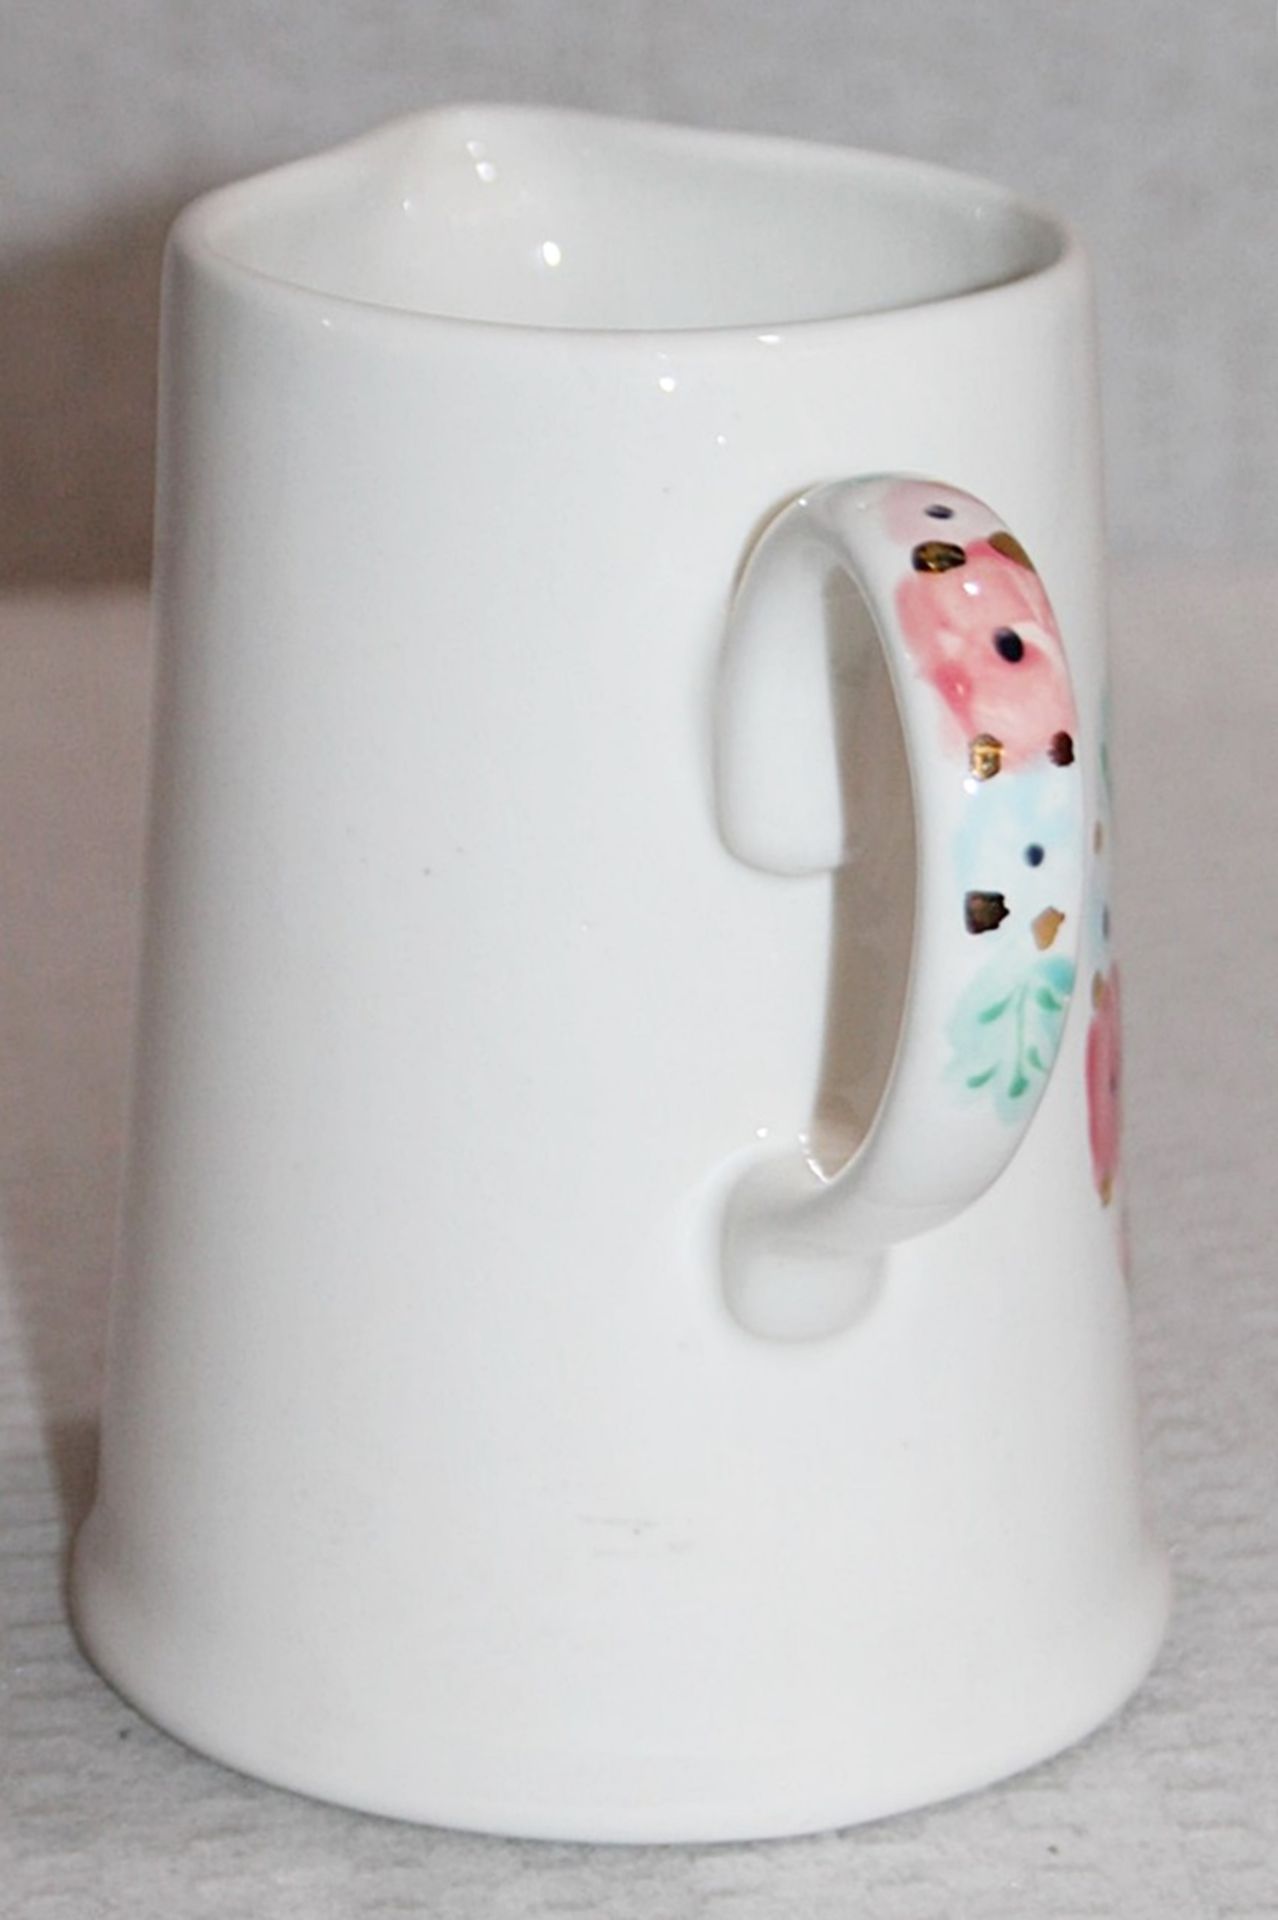 1 x Ceramic Handpainted Jug With Gilded Edging - Ex-Display Item From A London Department Store - - Image 2 of 7